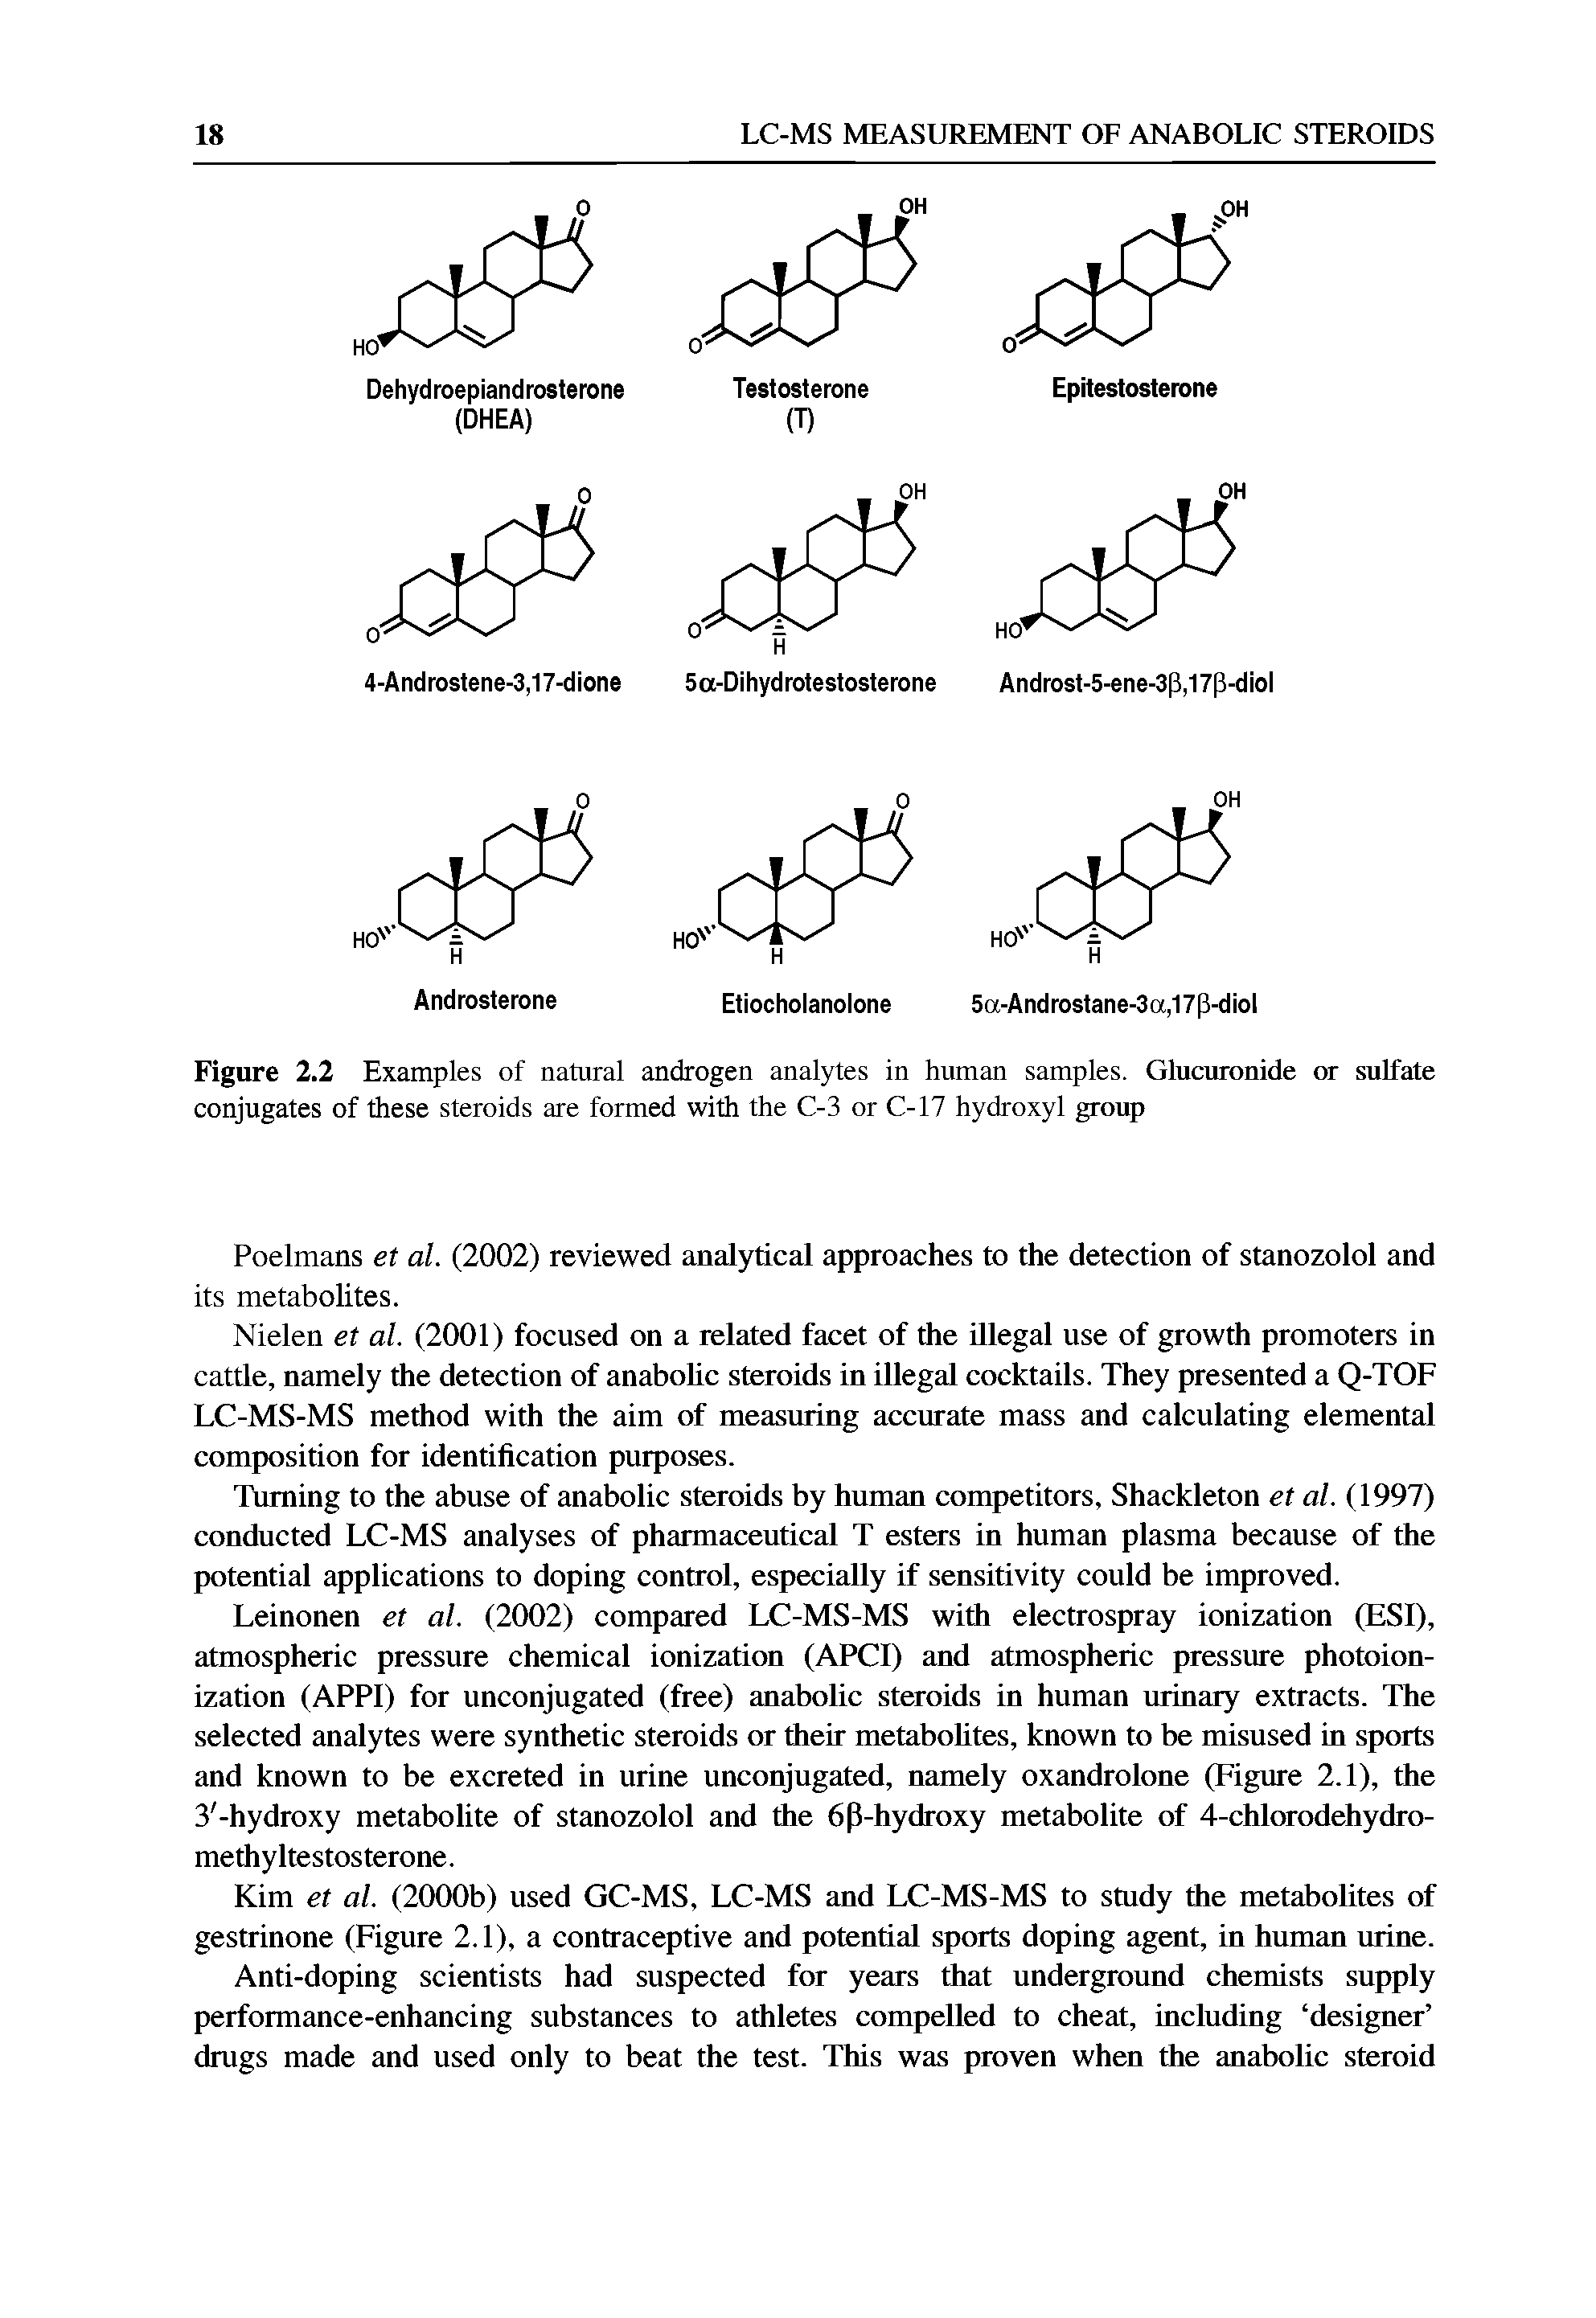 Figure 2.2 Examples of natural androgen analytes in human samples. Glucuronide or sulfate conjugates of these steroids are formed with the C-3 or C-17 hydroxyl group...